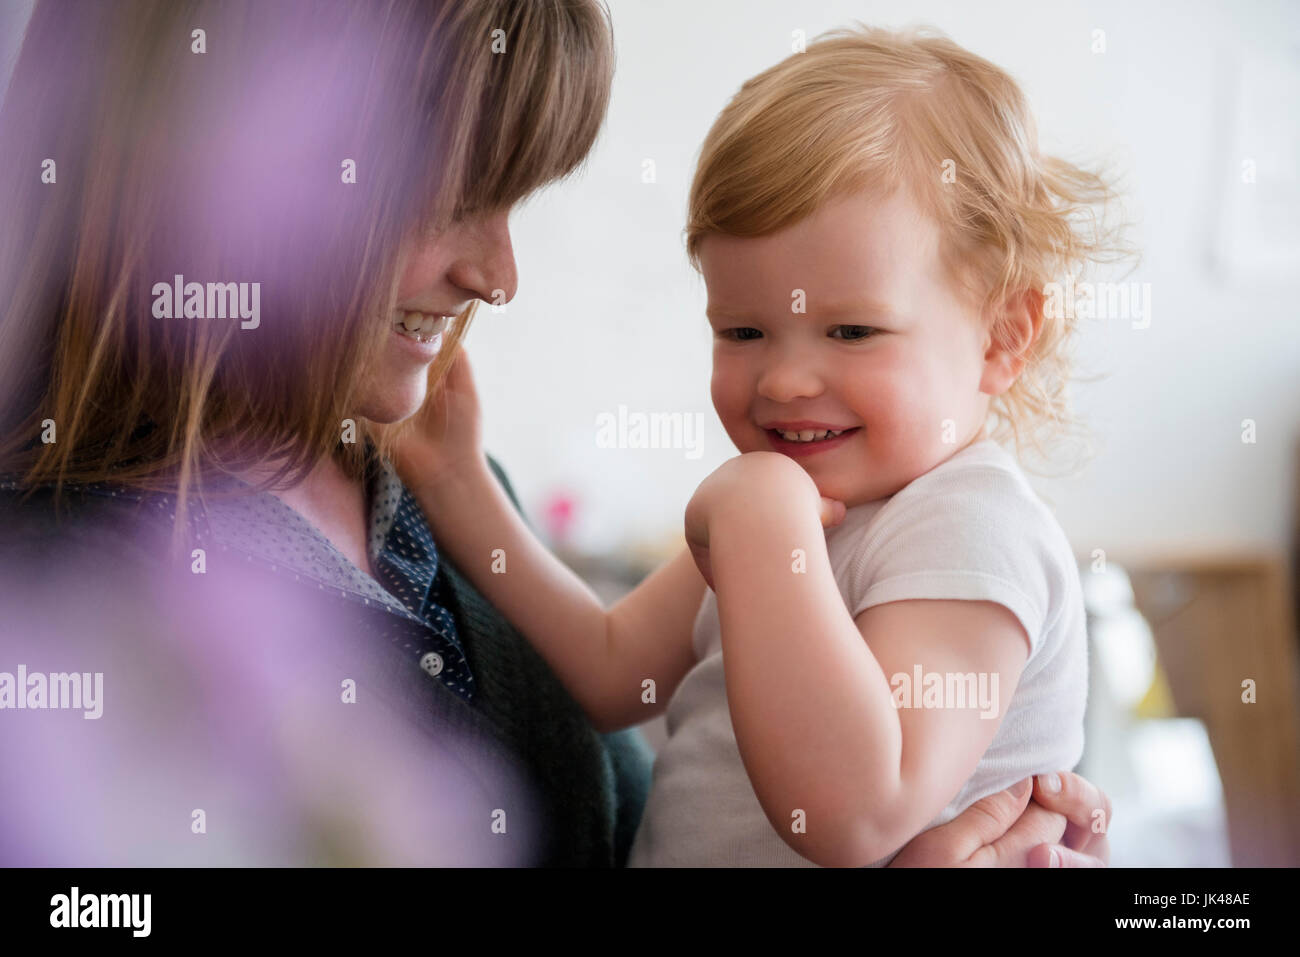 Caucasian mother holding laughing daughter Stock Photo